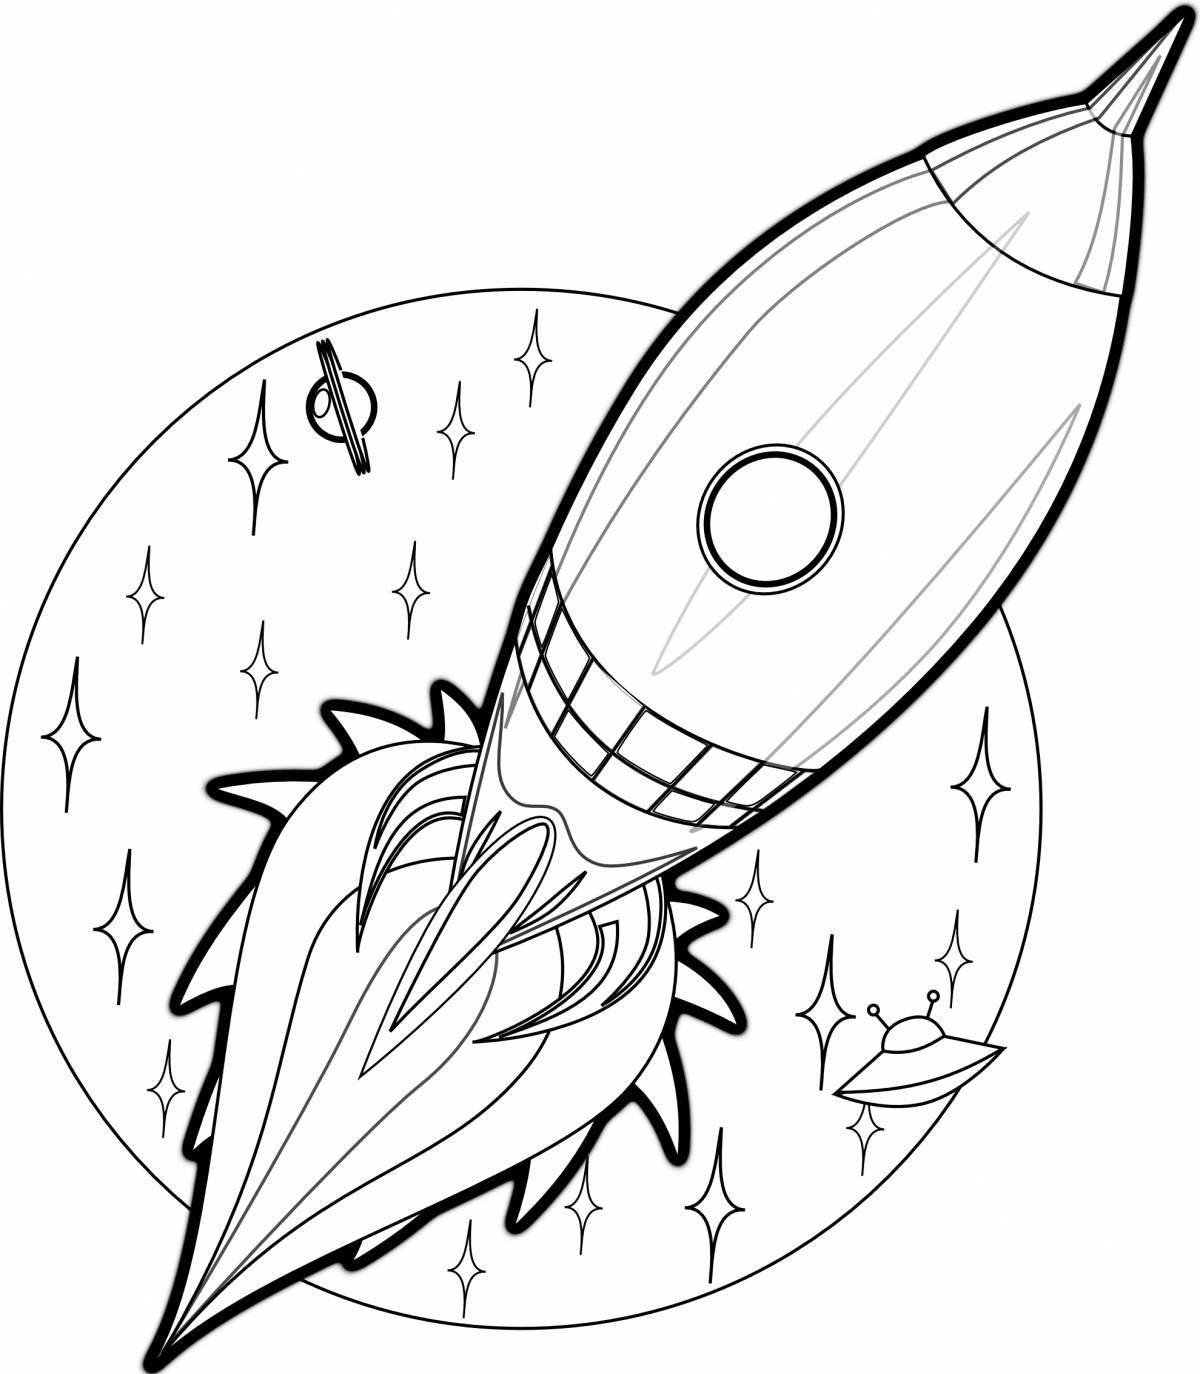 Vibrant spaceship coloring page for kids